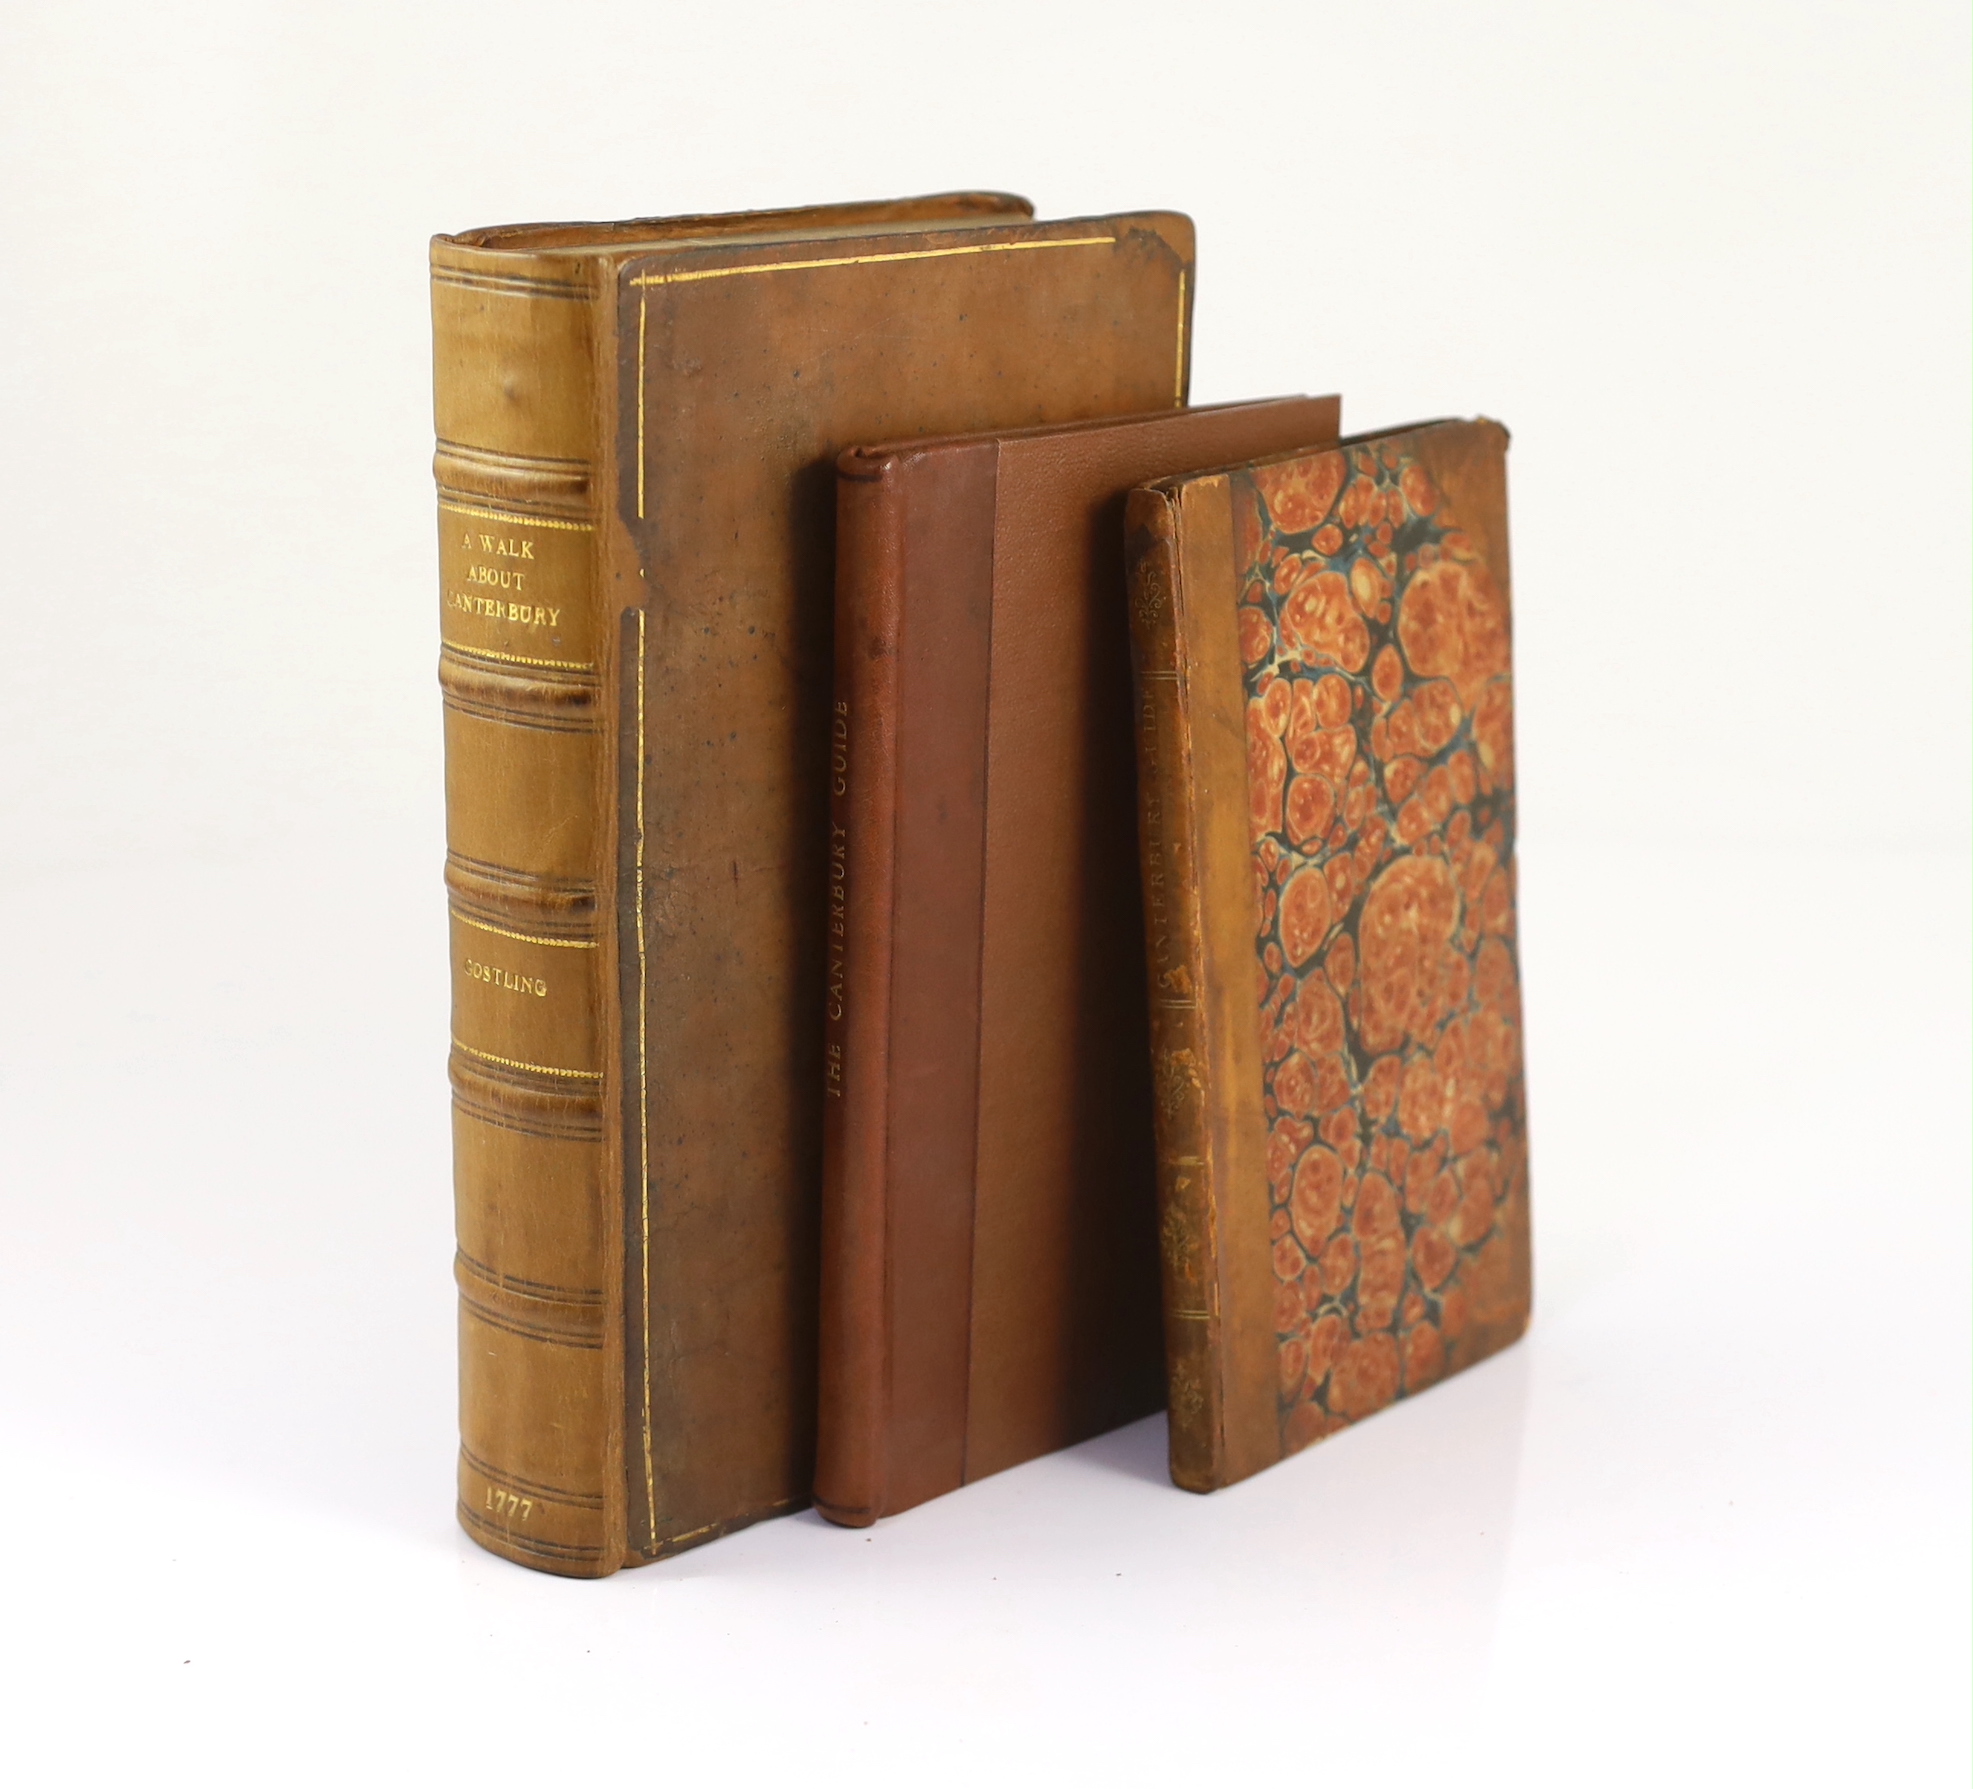 [Hasted, Edward] - The Canterbury Guide:, or Travellers Pocket Companion ... in that ancient city and its suburbs ... By An Inhabitant. 3 folded plates; old half calf and marbled boards. Canterbury: printed and sold by C